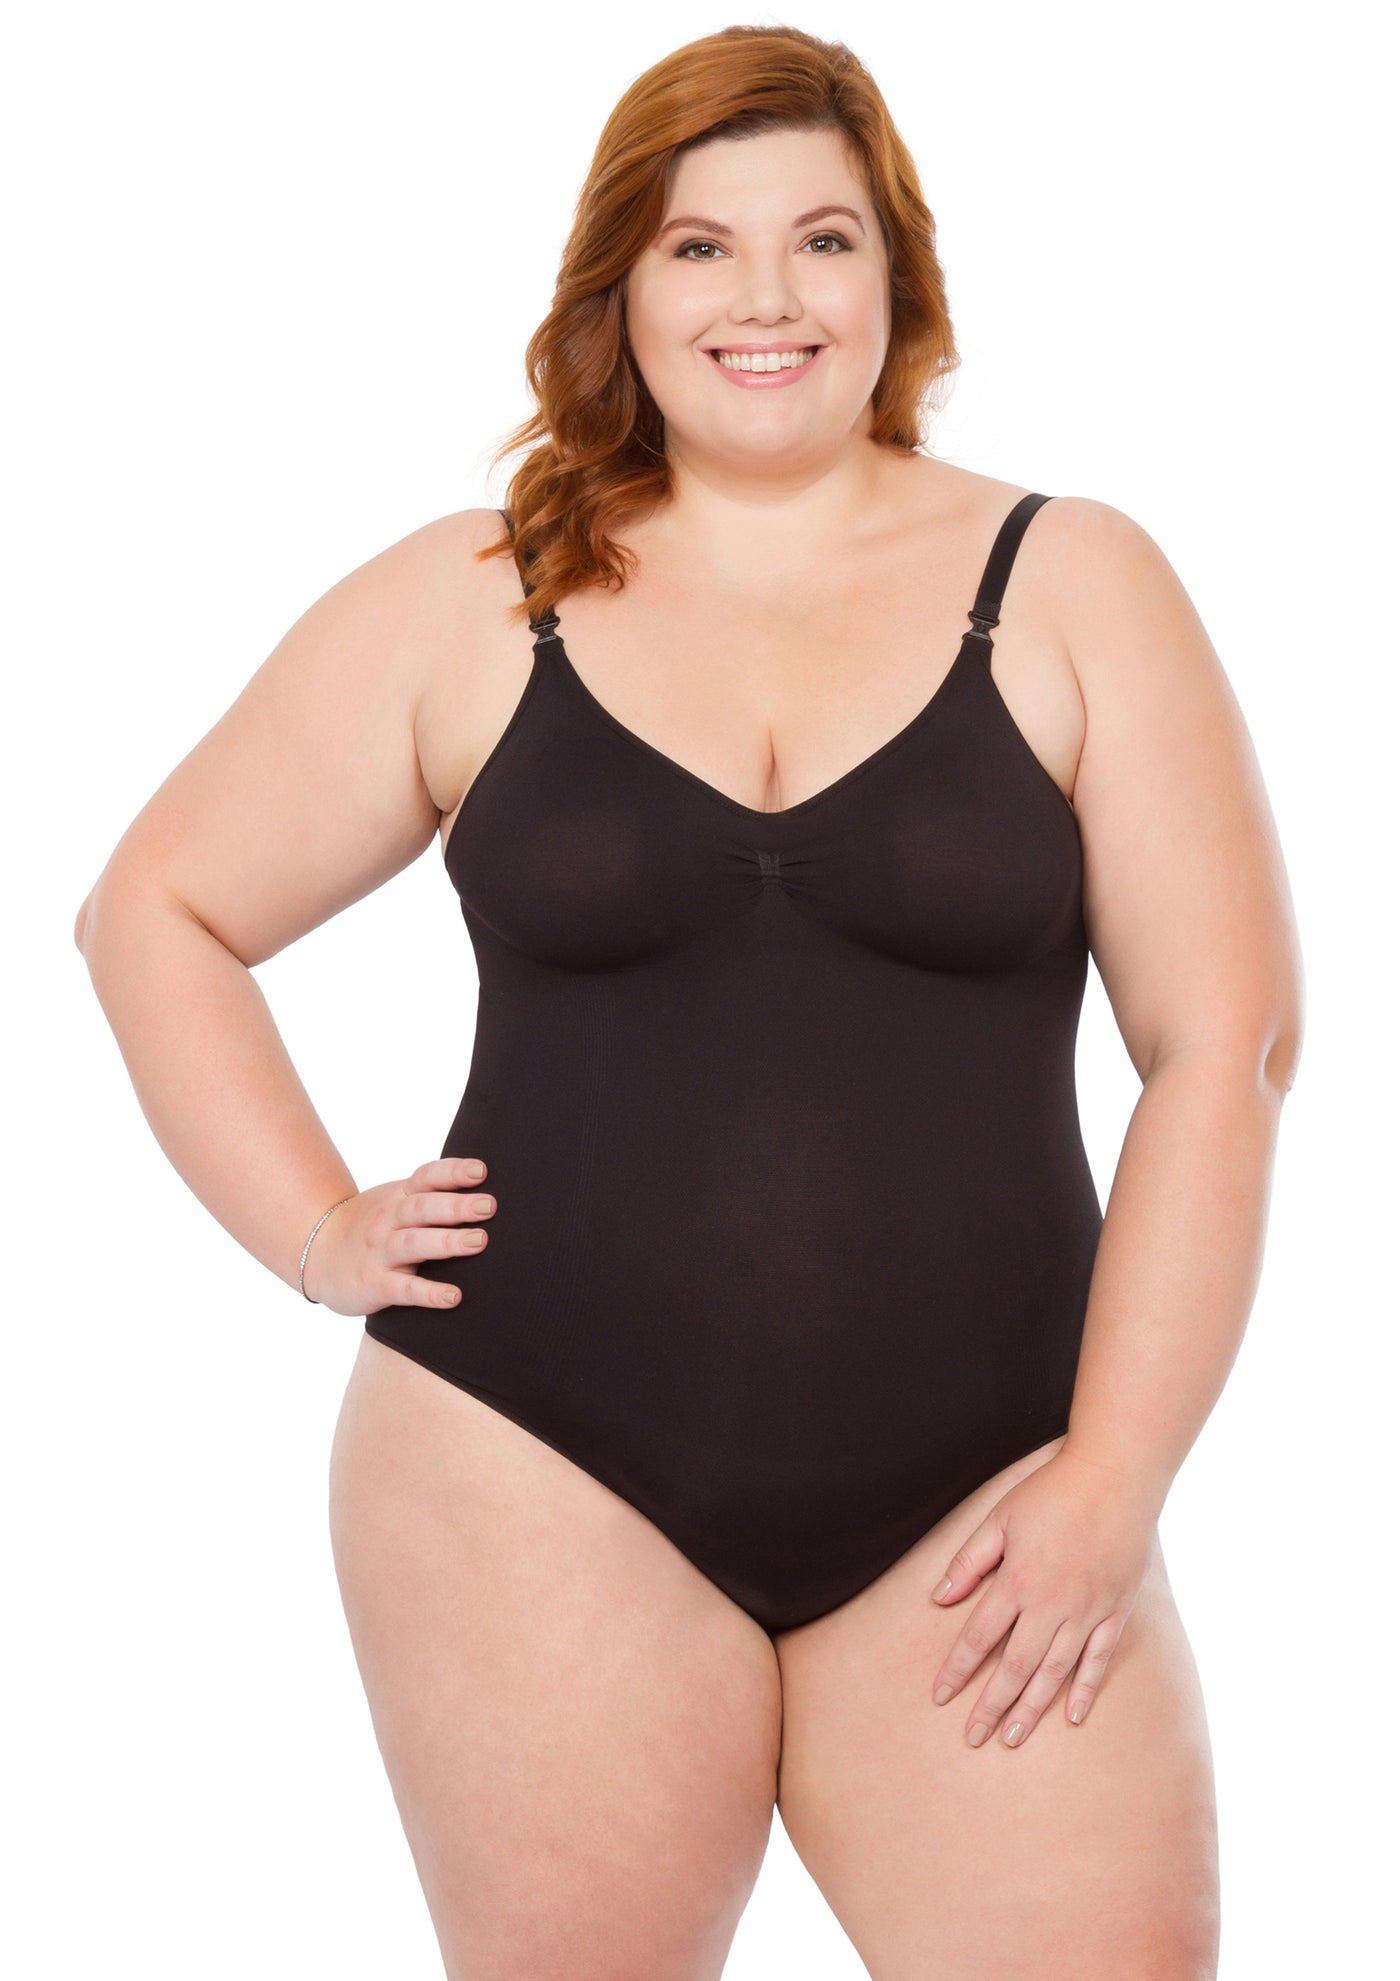 Plie Australia - No matter what body shape and size you